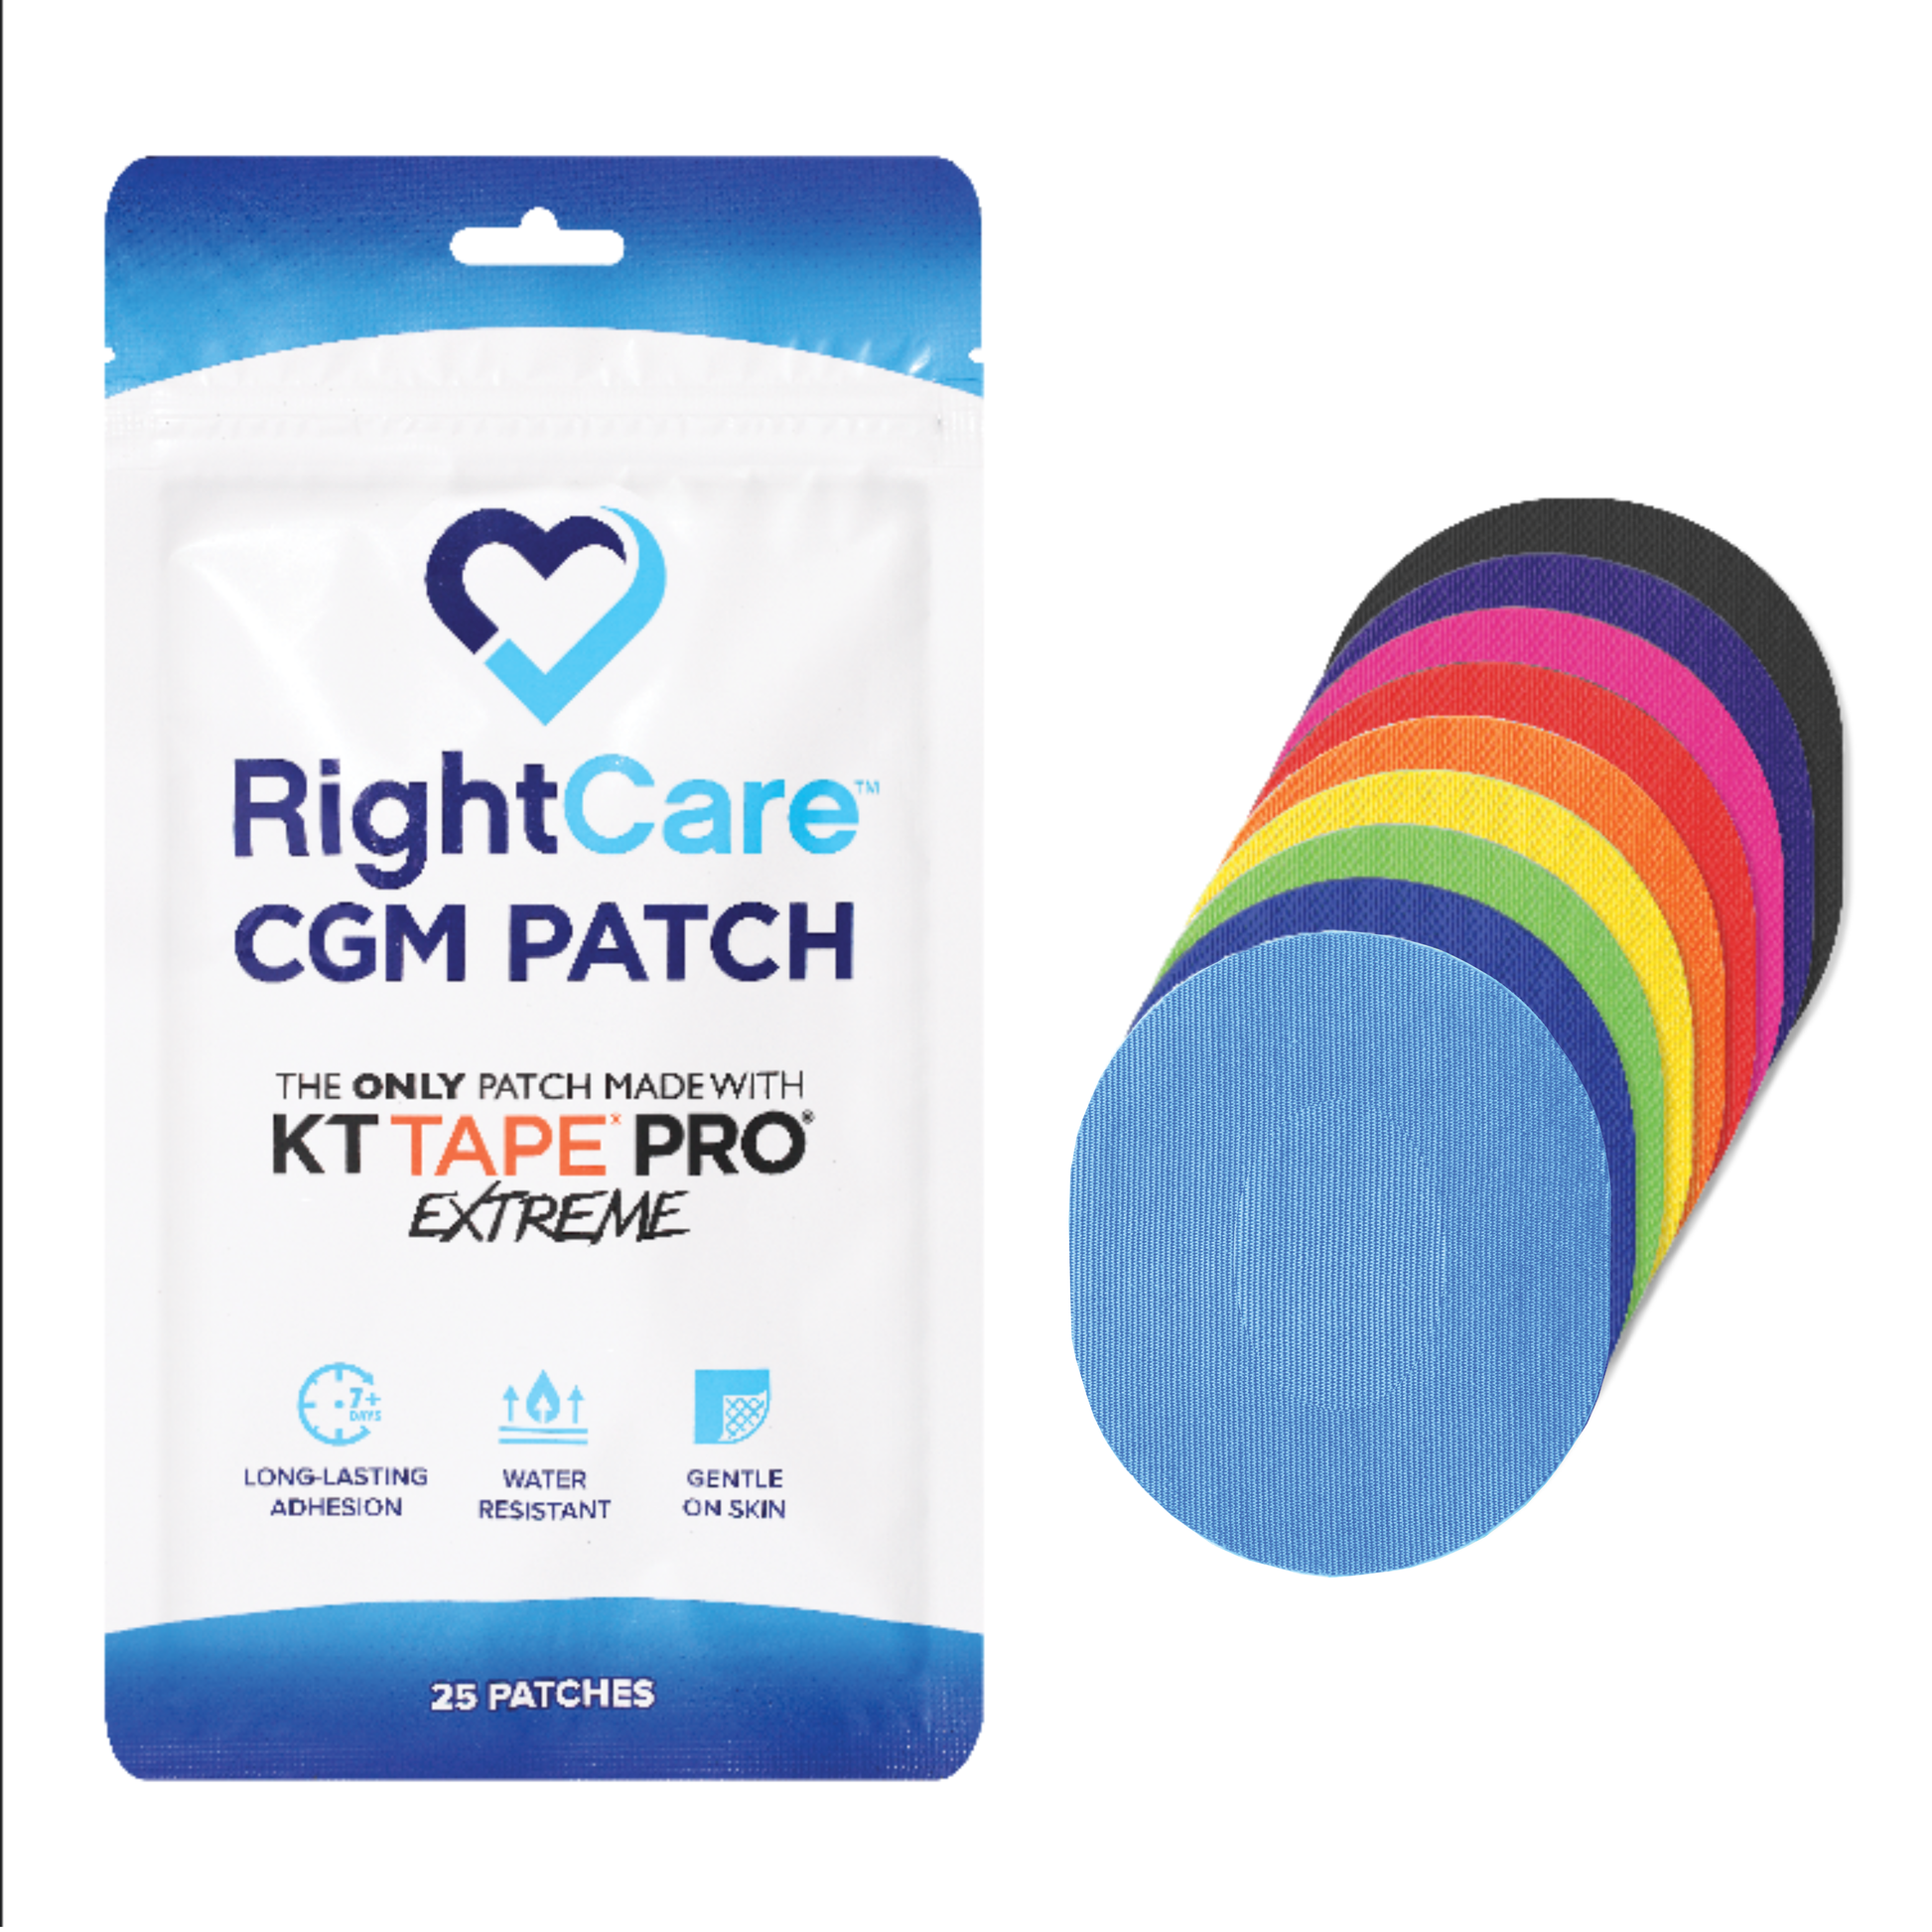 RightCare CGM Adhesive Patch made with KT Tape, Universal, Bag of 25 94996188